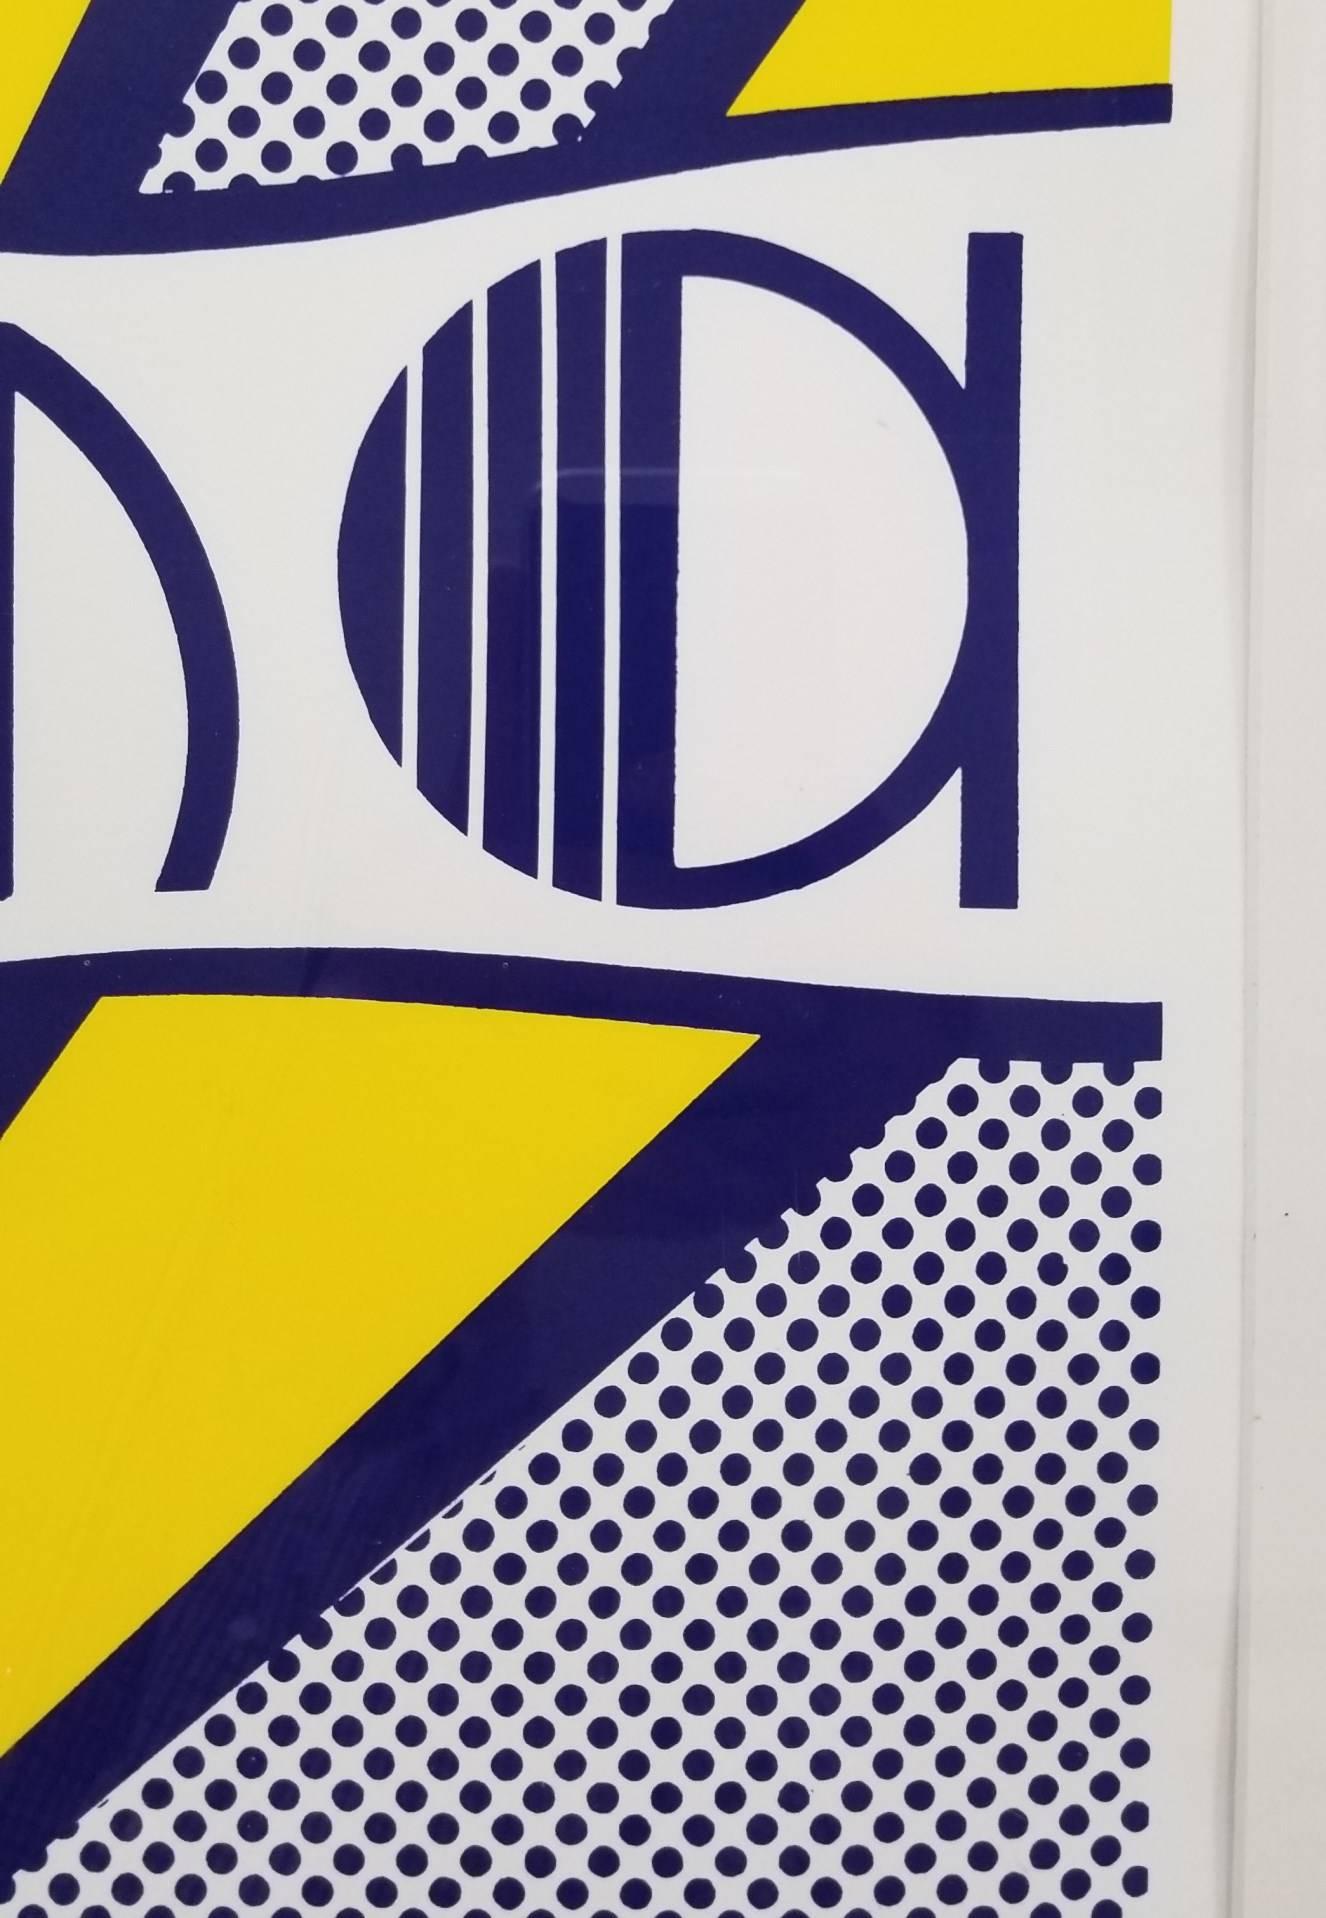 An original signed offset-lithograph on white wove paper by American artist Roy Lichtenstein (1923-1997) titled 